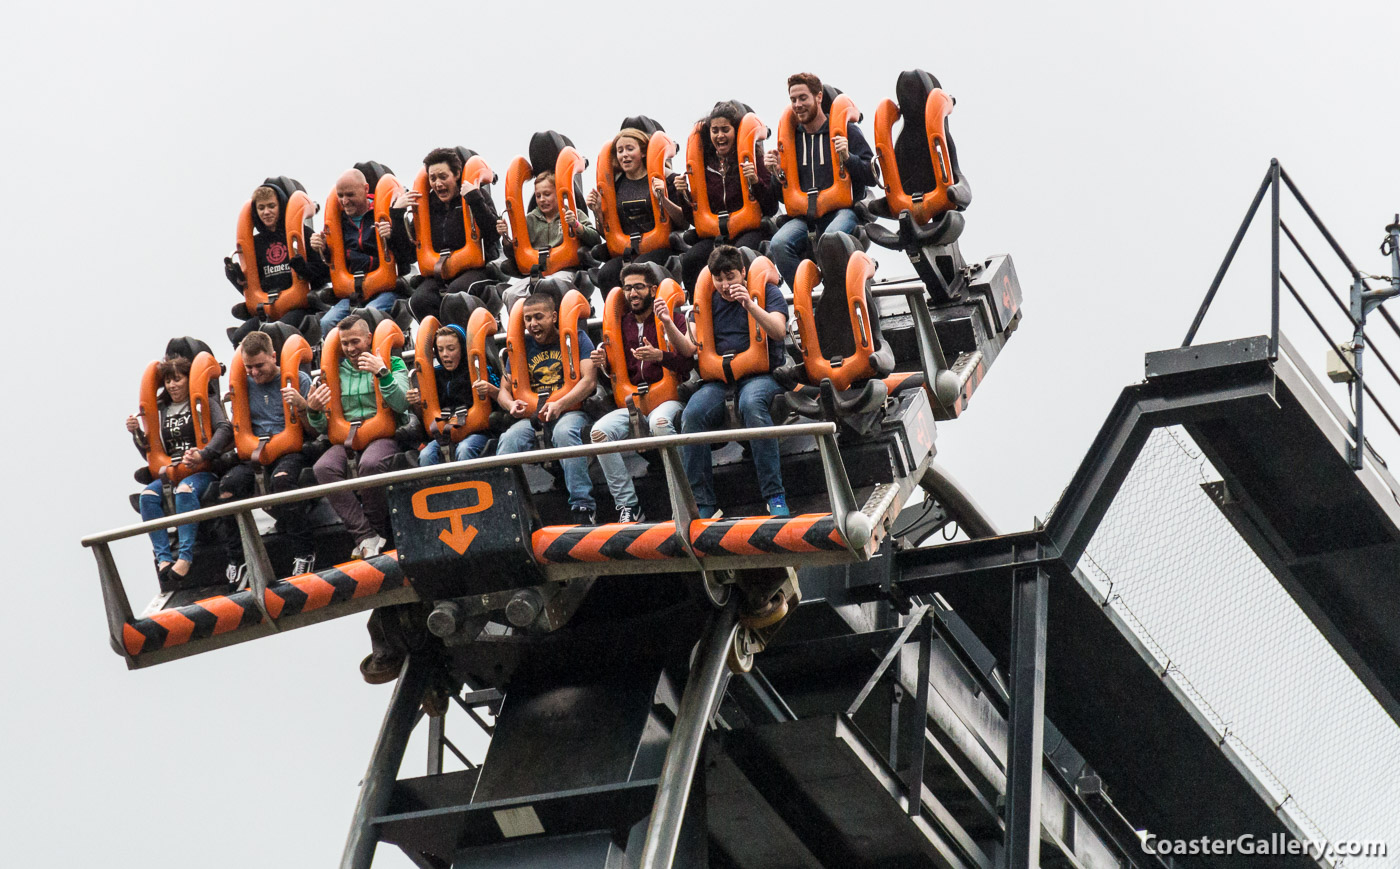 Oblivion roller coaster at Alton Towers